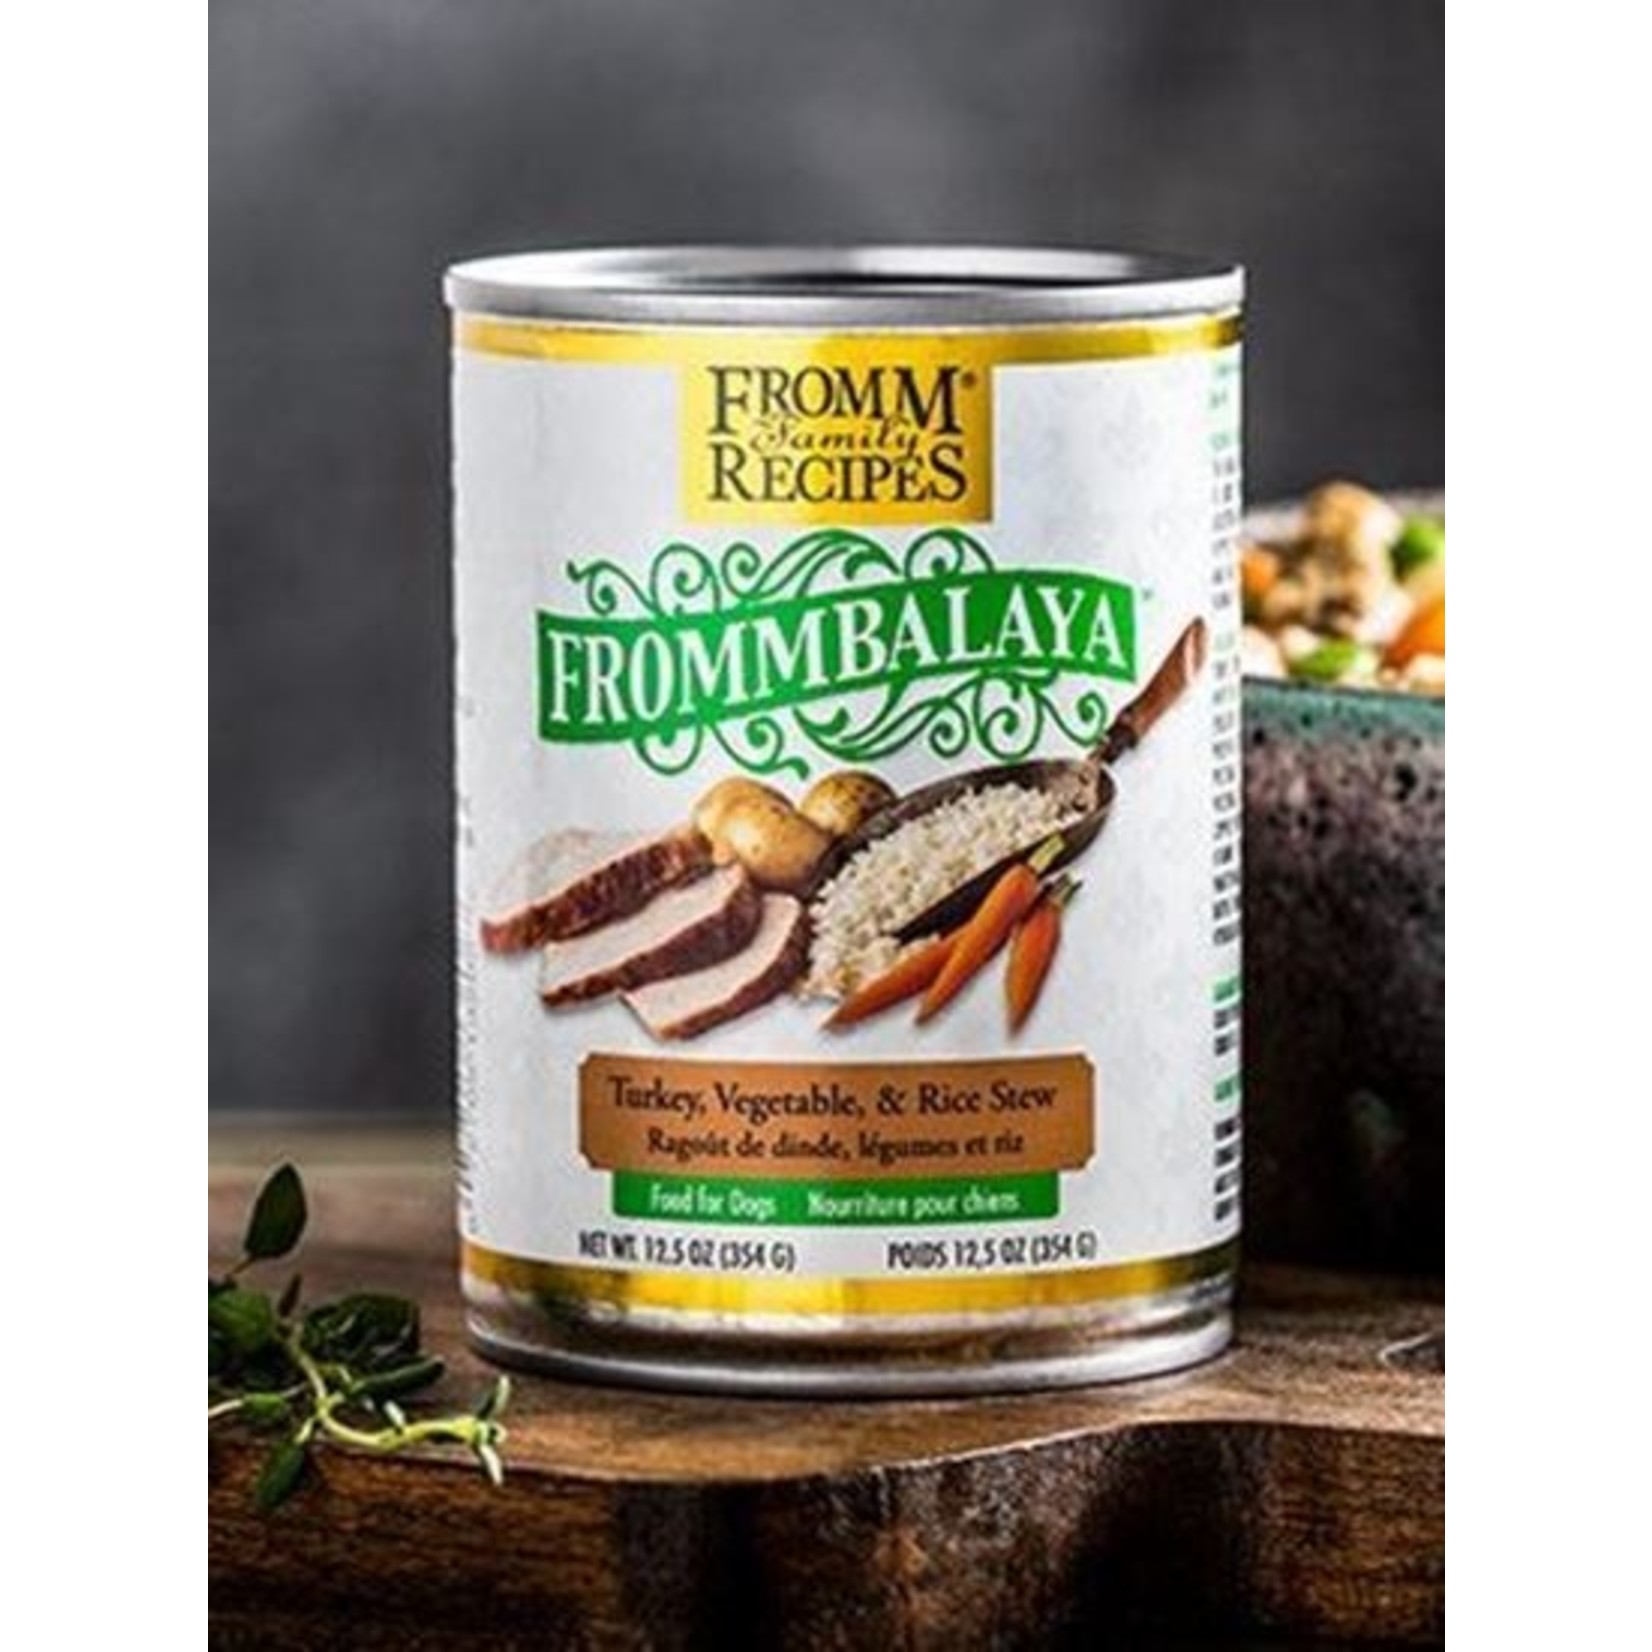 Fromm Family Fromm Frommbalaya Turkey, Vegetable, & Rice Stew Dog Food Can 12.5oz